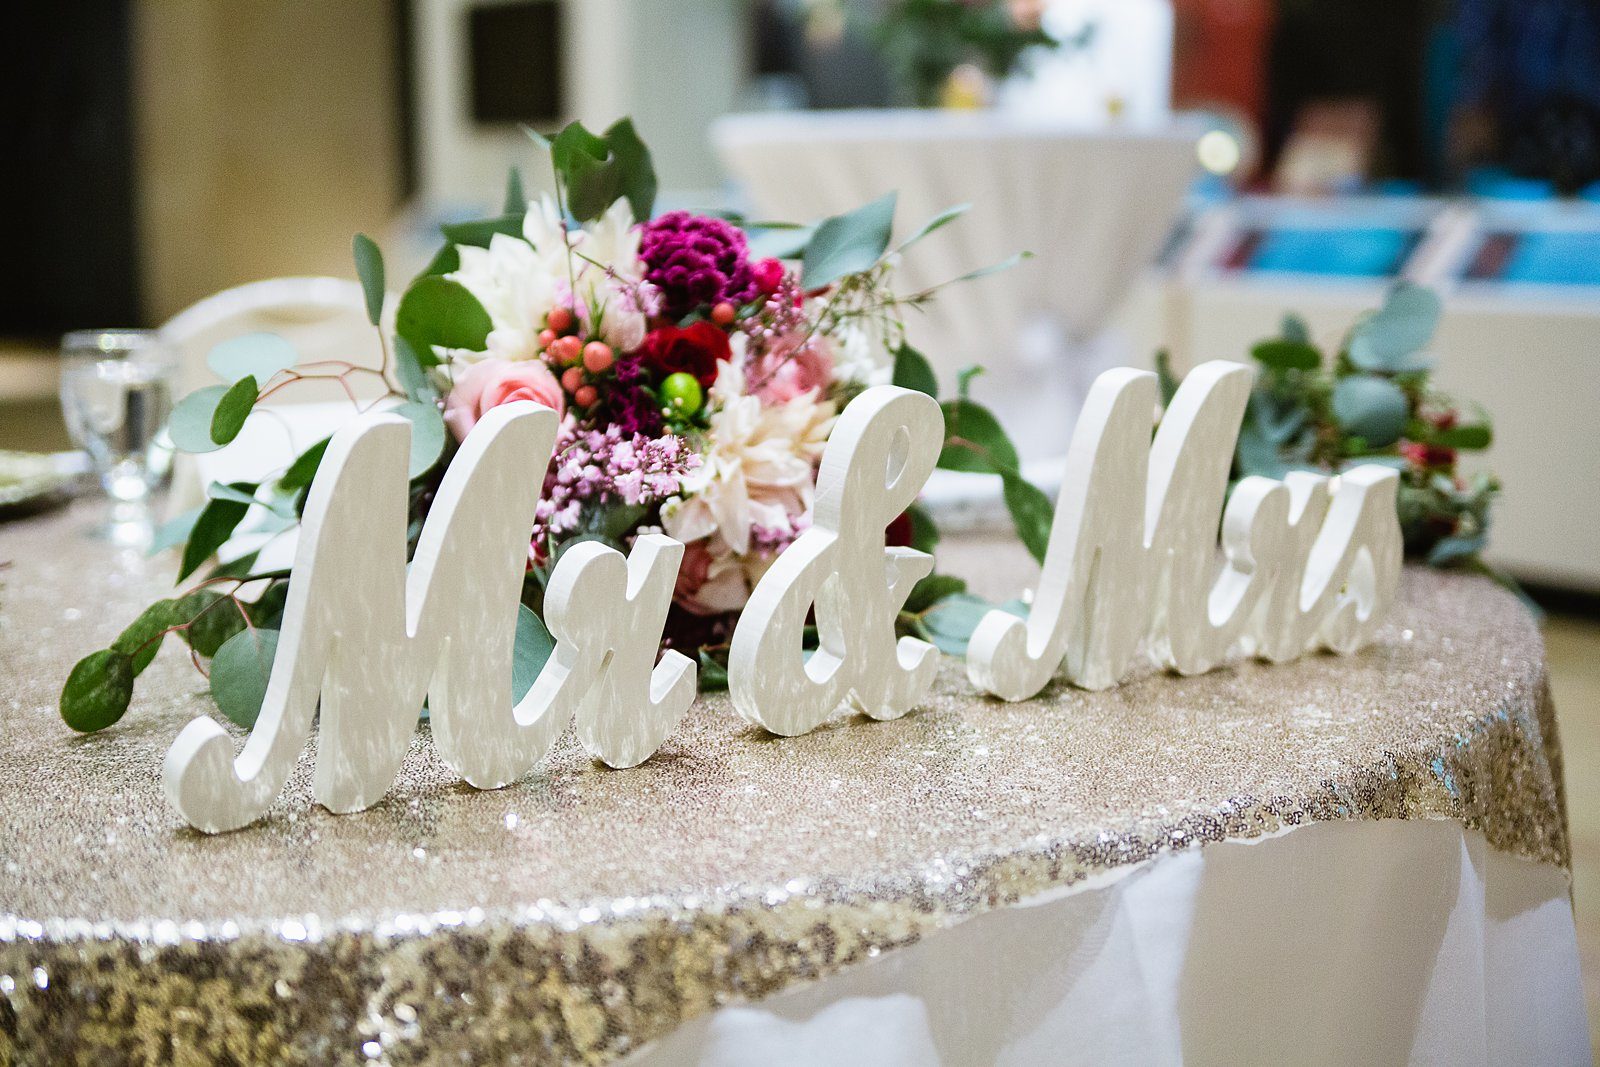 Mr. & Mrs decoration on a sweetheart table by PMA Photography.